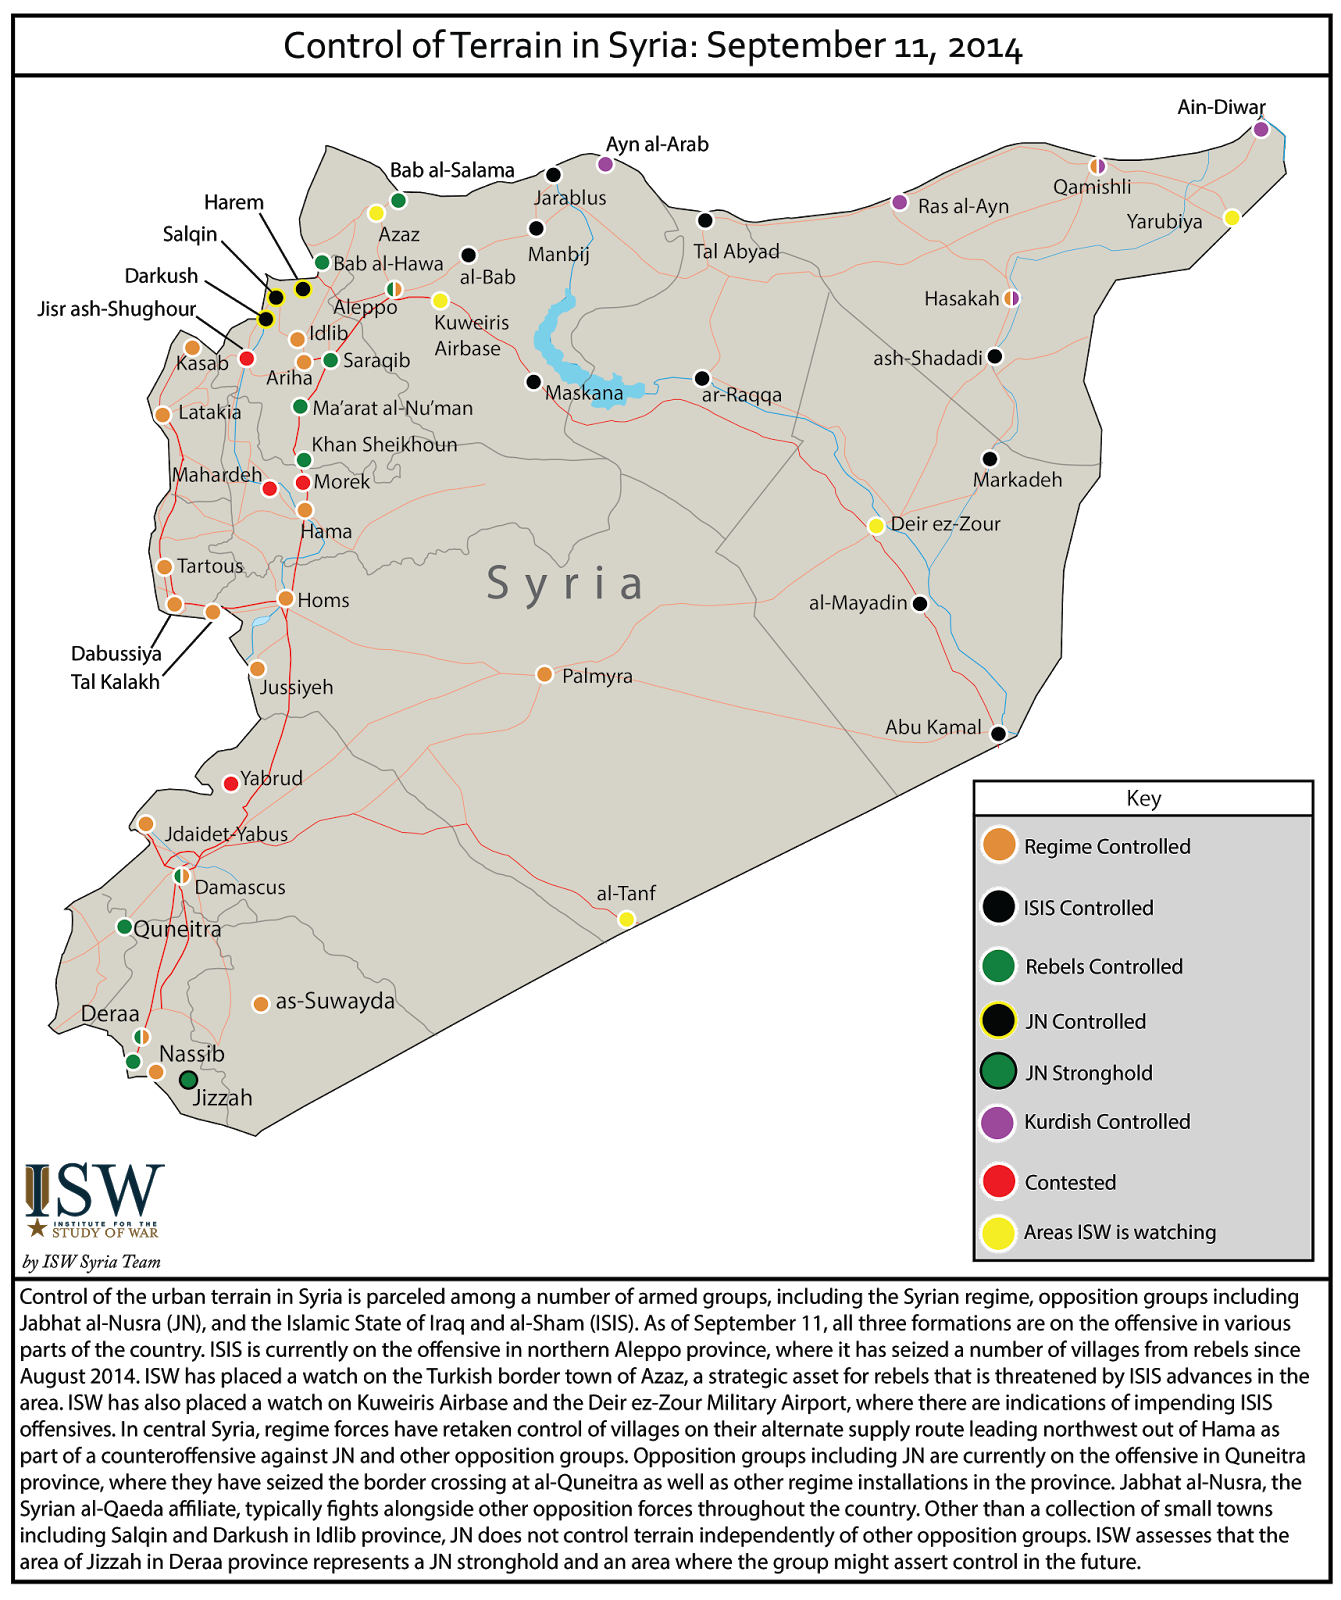 Syria%2BControl%2BMap%2BSept.%2B11%2BHIGH-01.png